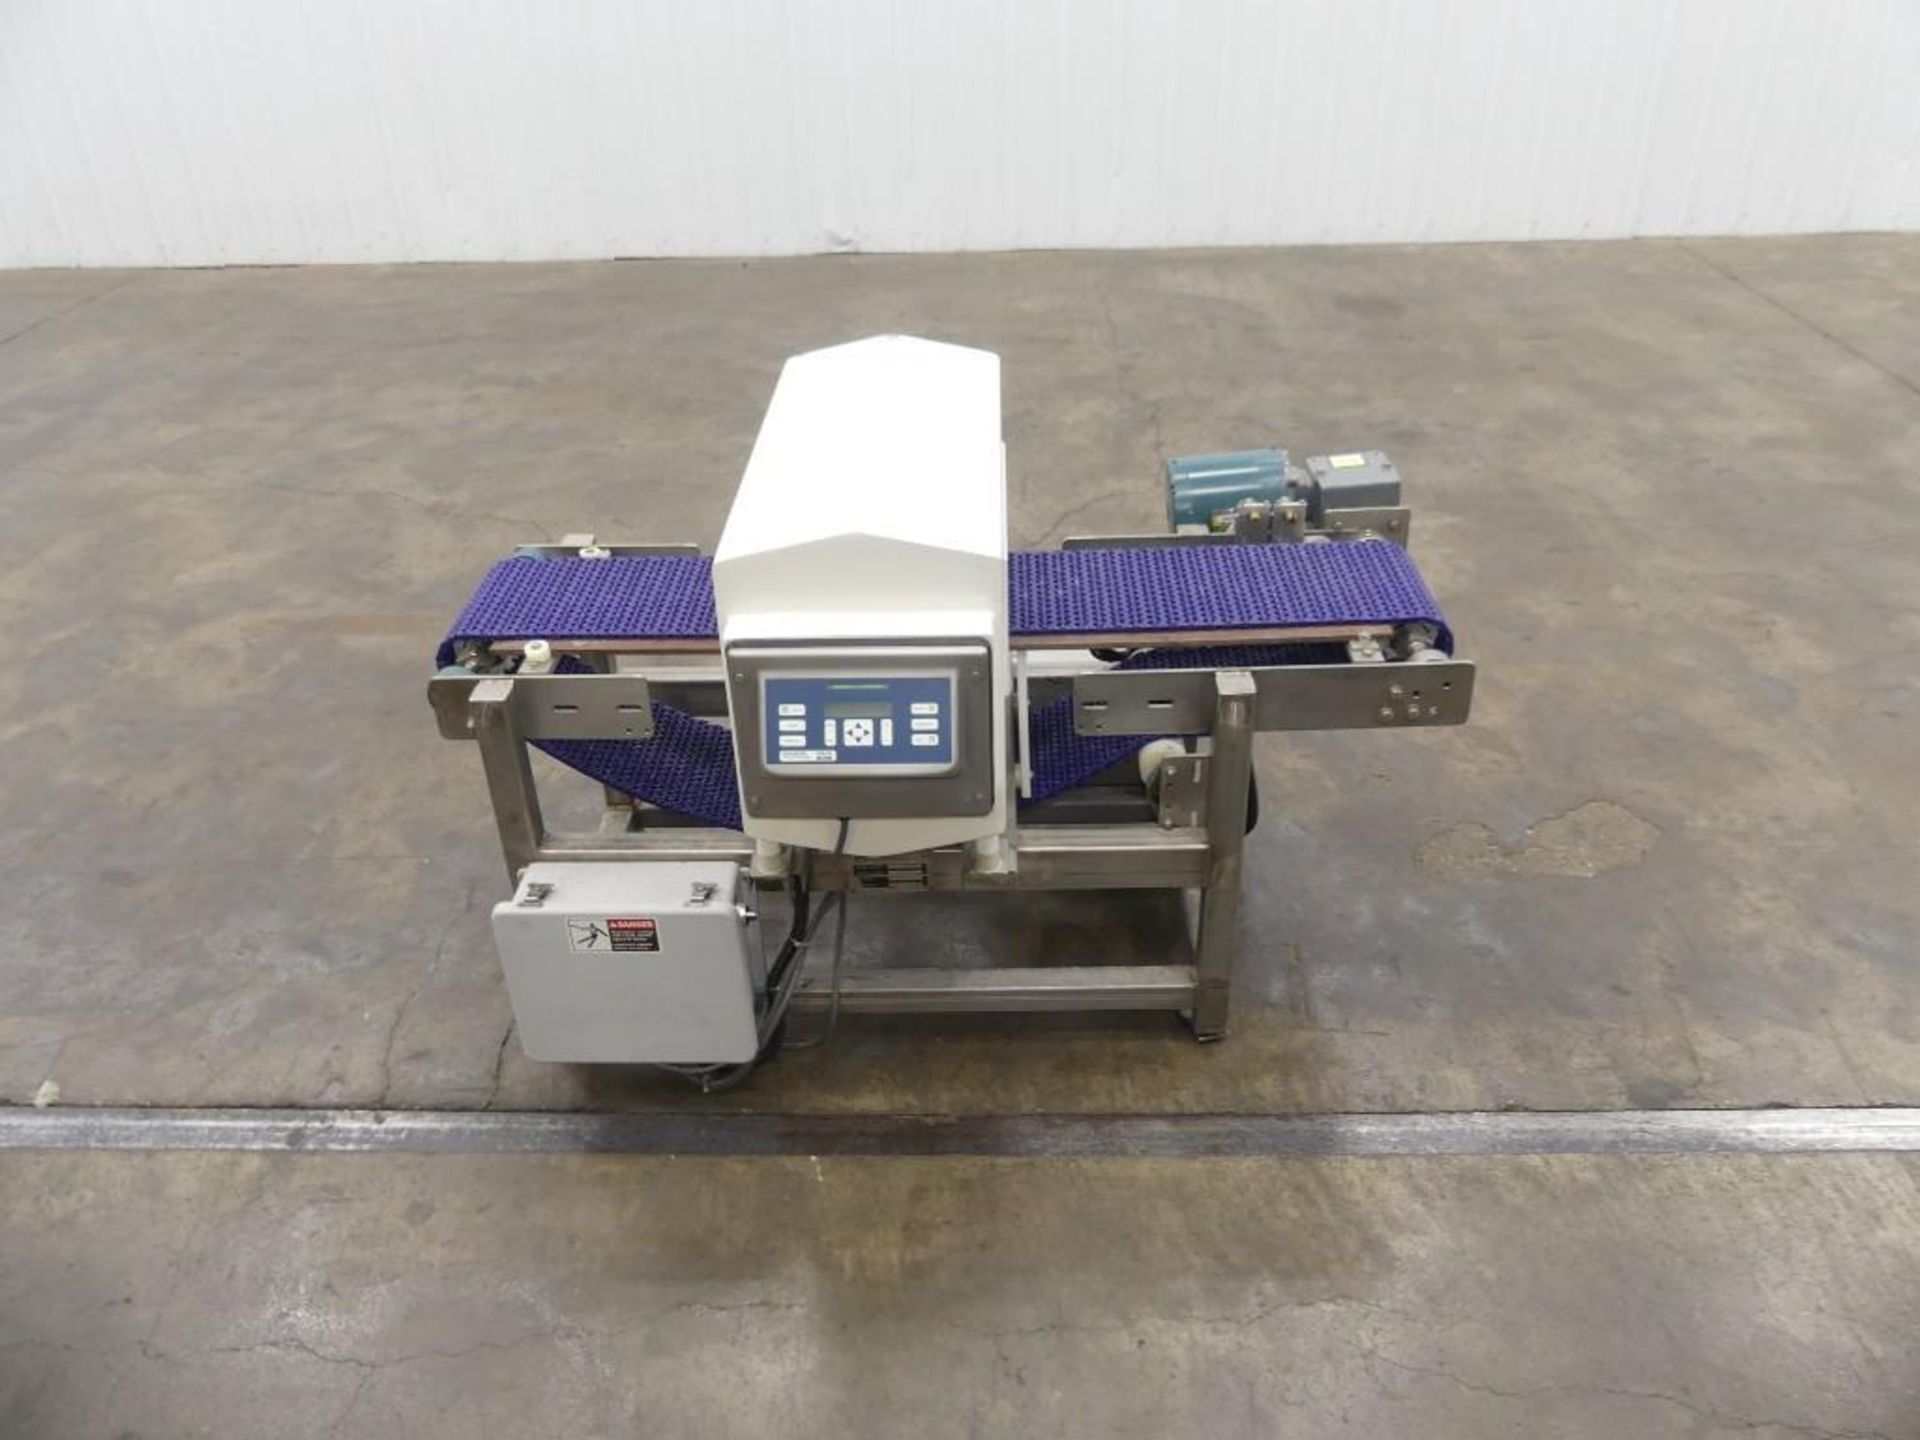 Schneider Packaging Equipment Co. 57SS10BAB with a Goring Kerr Metal Detector